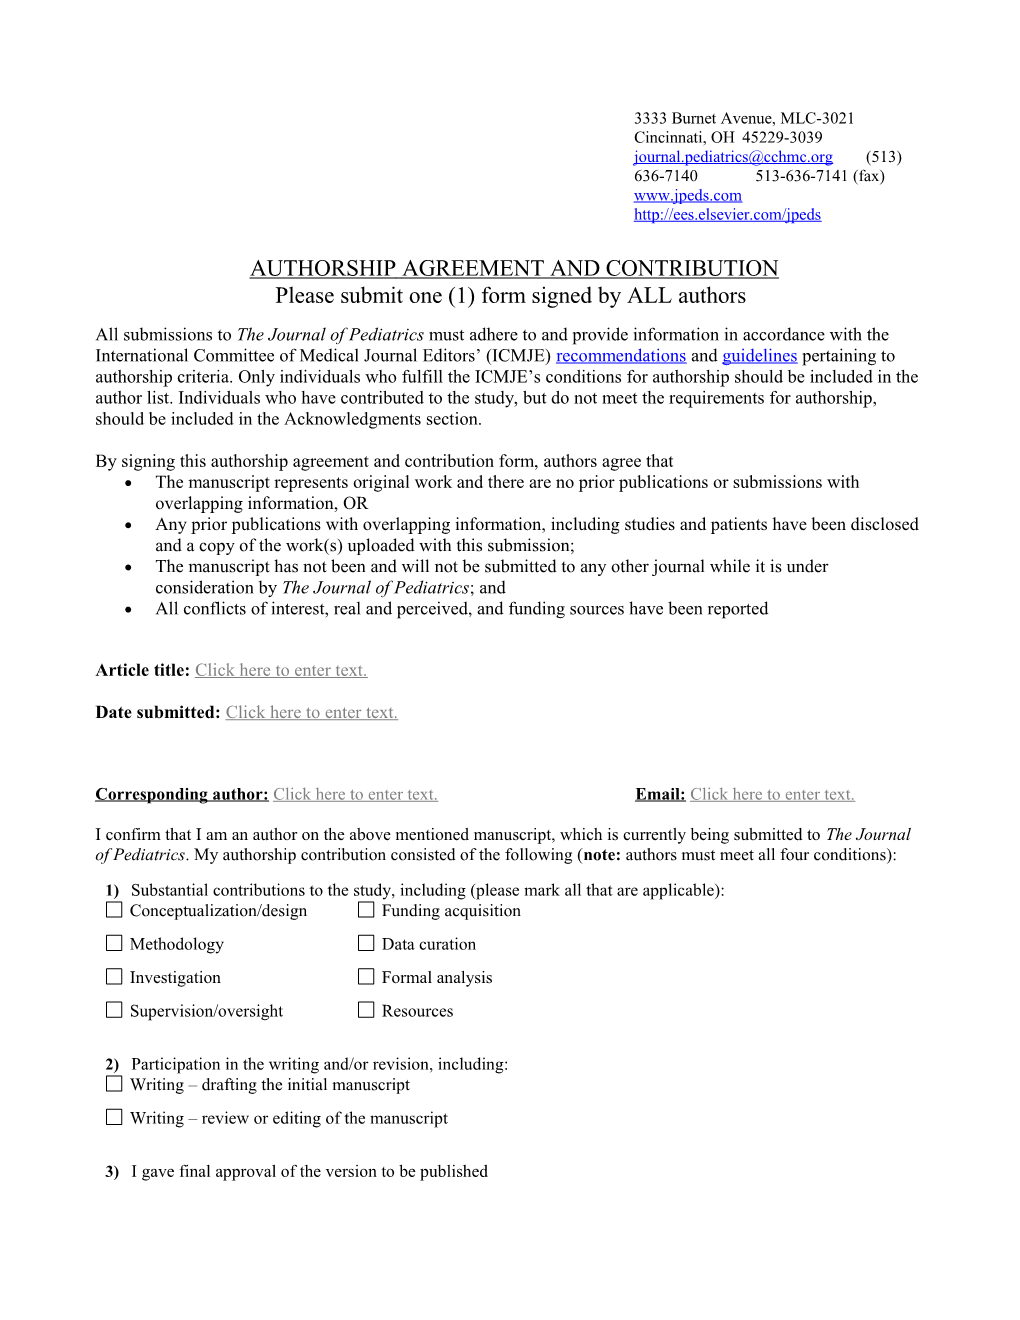 Authorshipagreement and Contribution